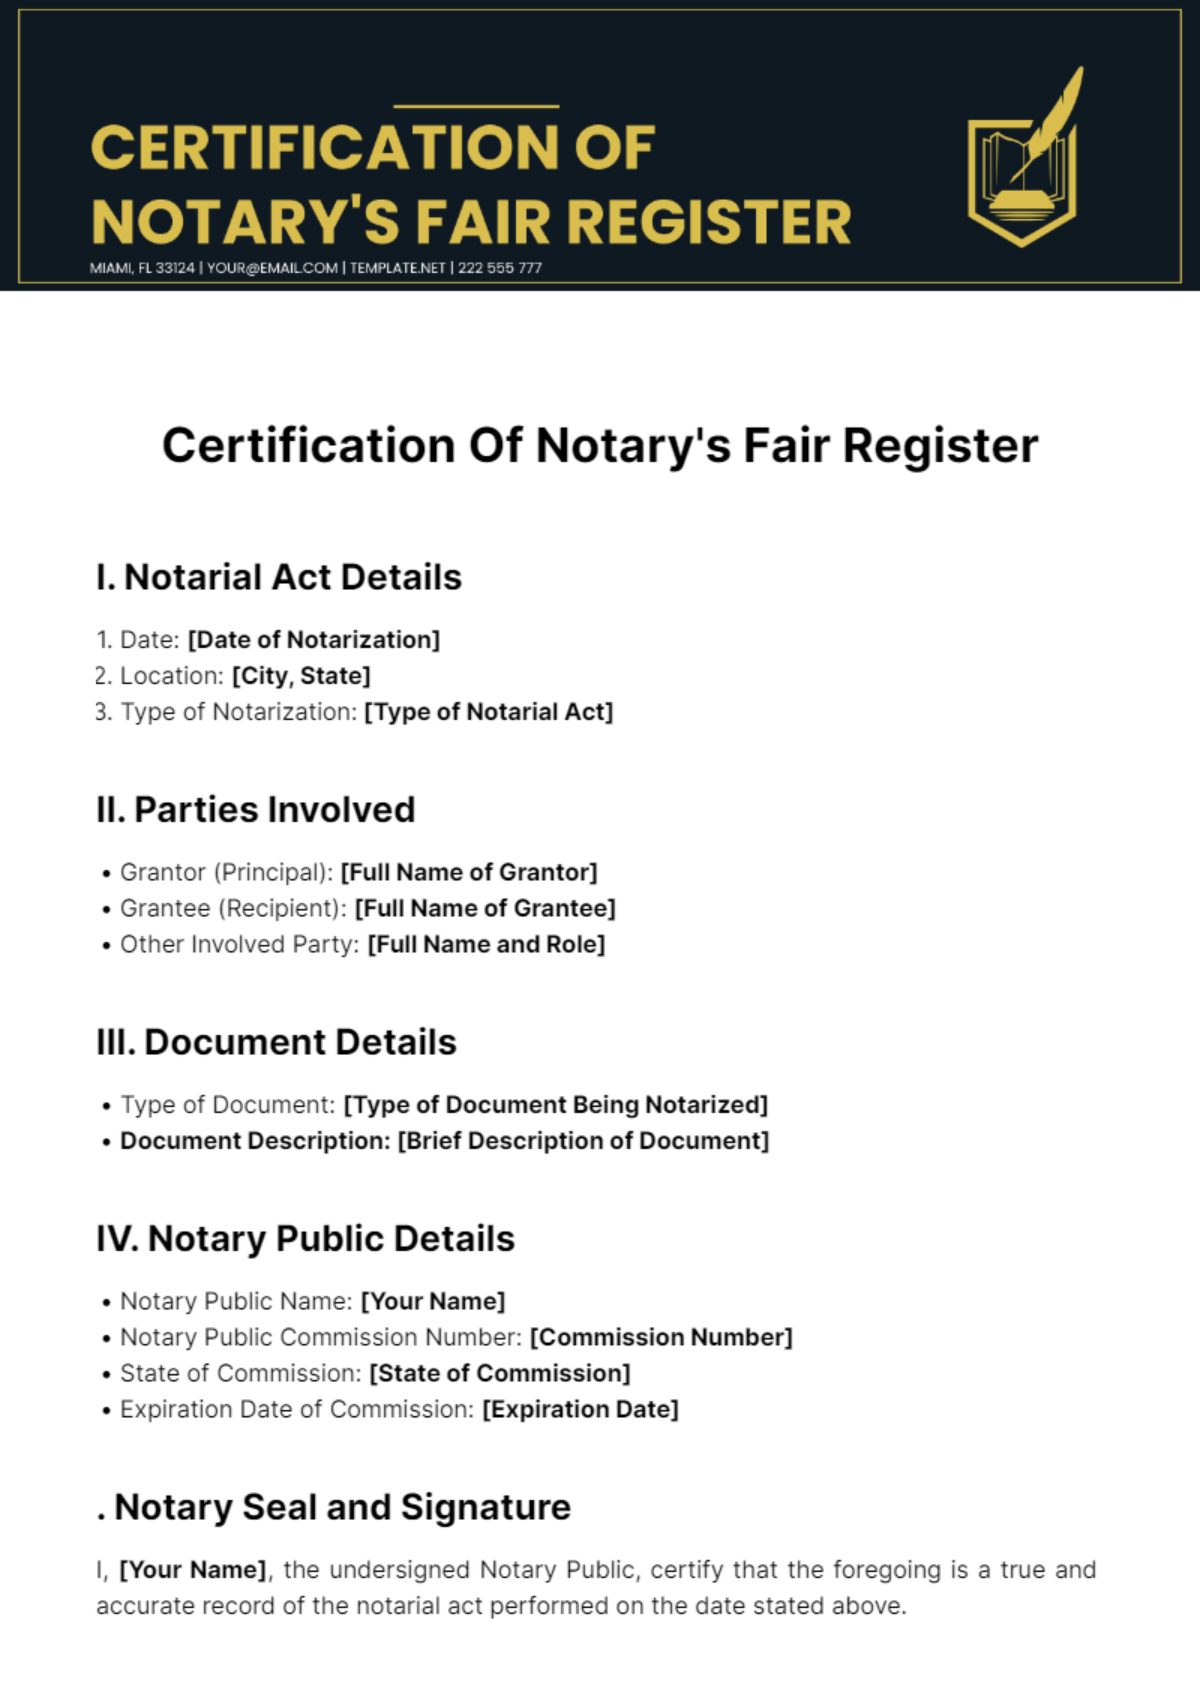 Certification Of Notary’s Fair Register Template